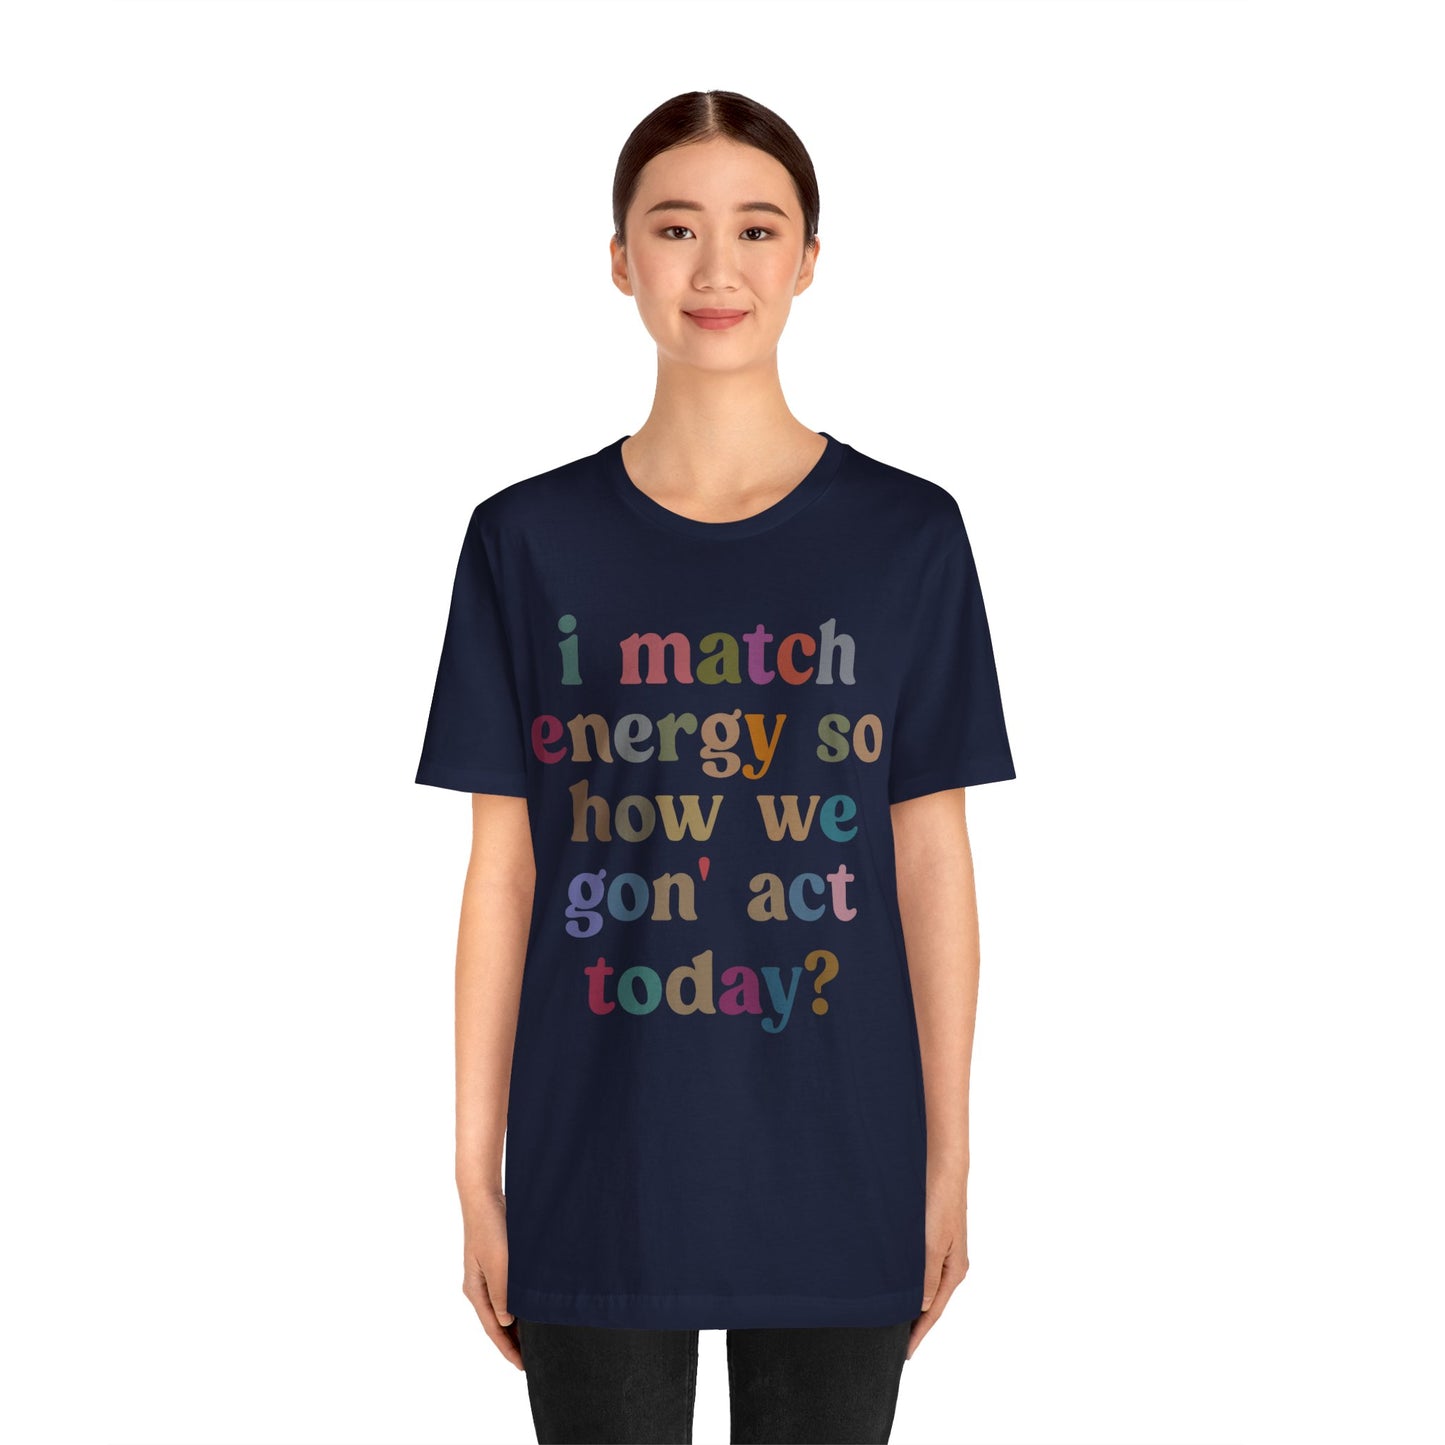 I Match Energy So How We Gon' Act Today Shirt, Best Friend Short, Motivational Quote Short, Funny Women Shirt, Sassy Vibe Shirt, T1139